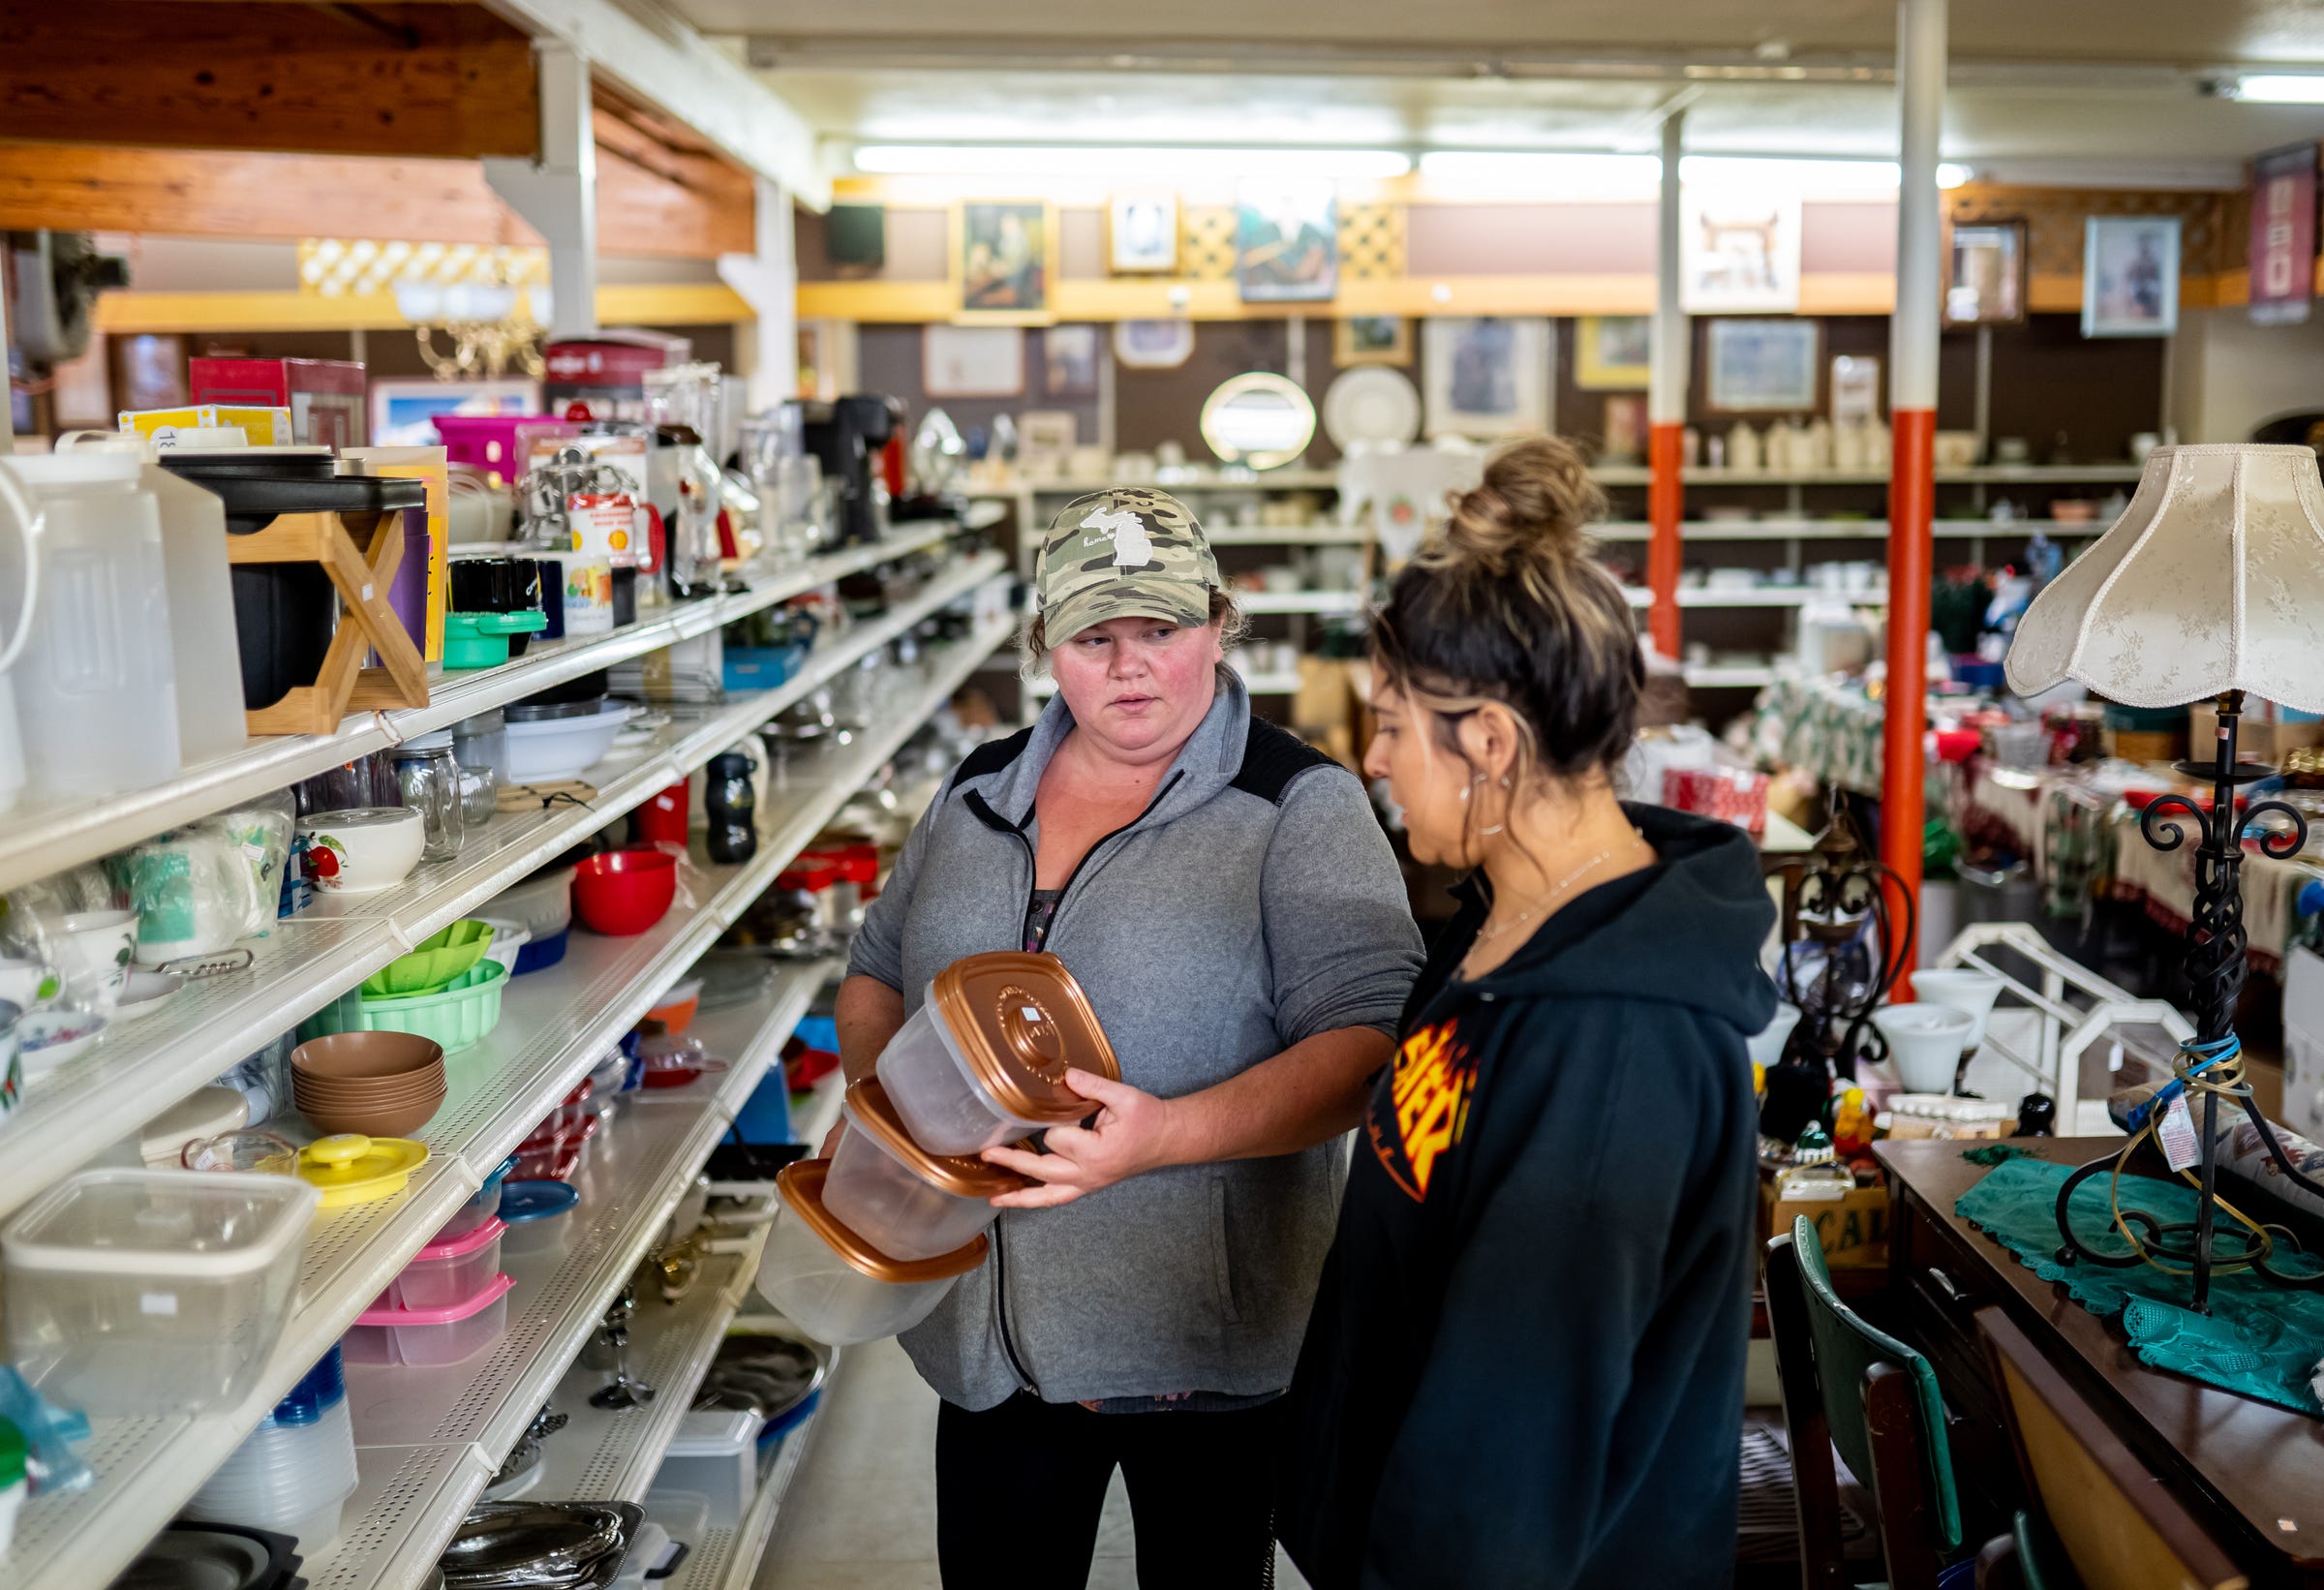 Shannon's Home Cooking owner Shannon Greathouse, left, checks in with an employee at the Dis n' Dat flea market she owns in Gwinn on Wednesday, Oct. 20, 2021.